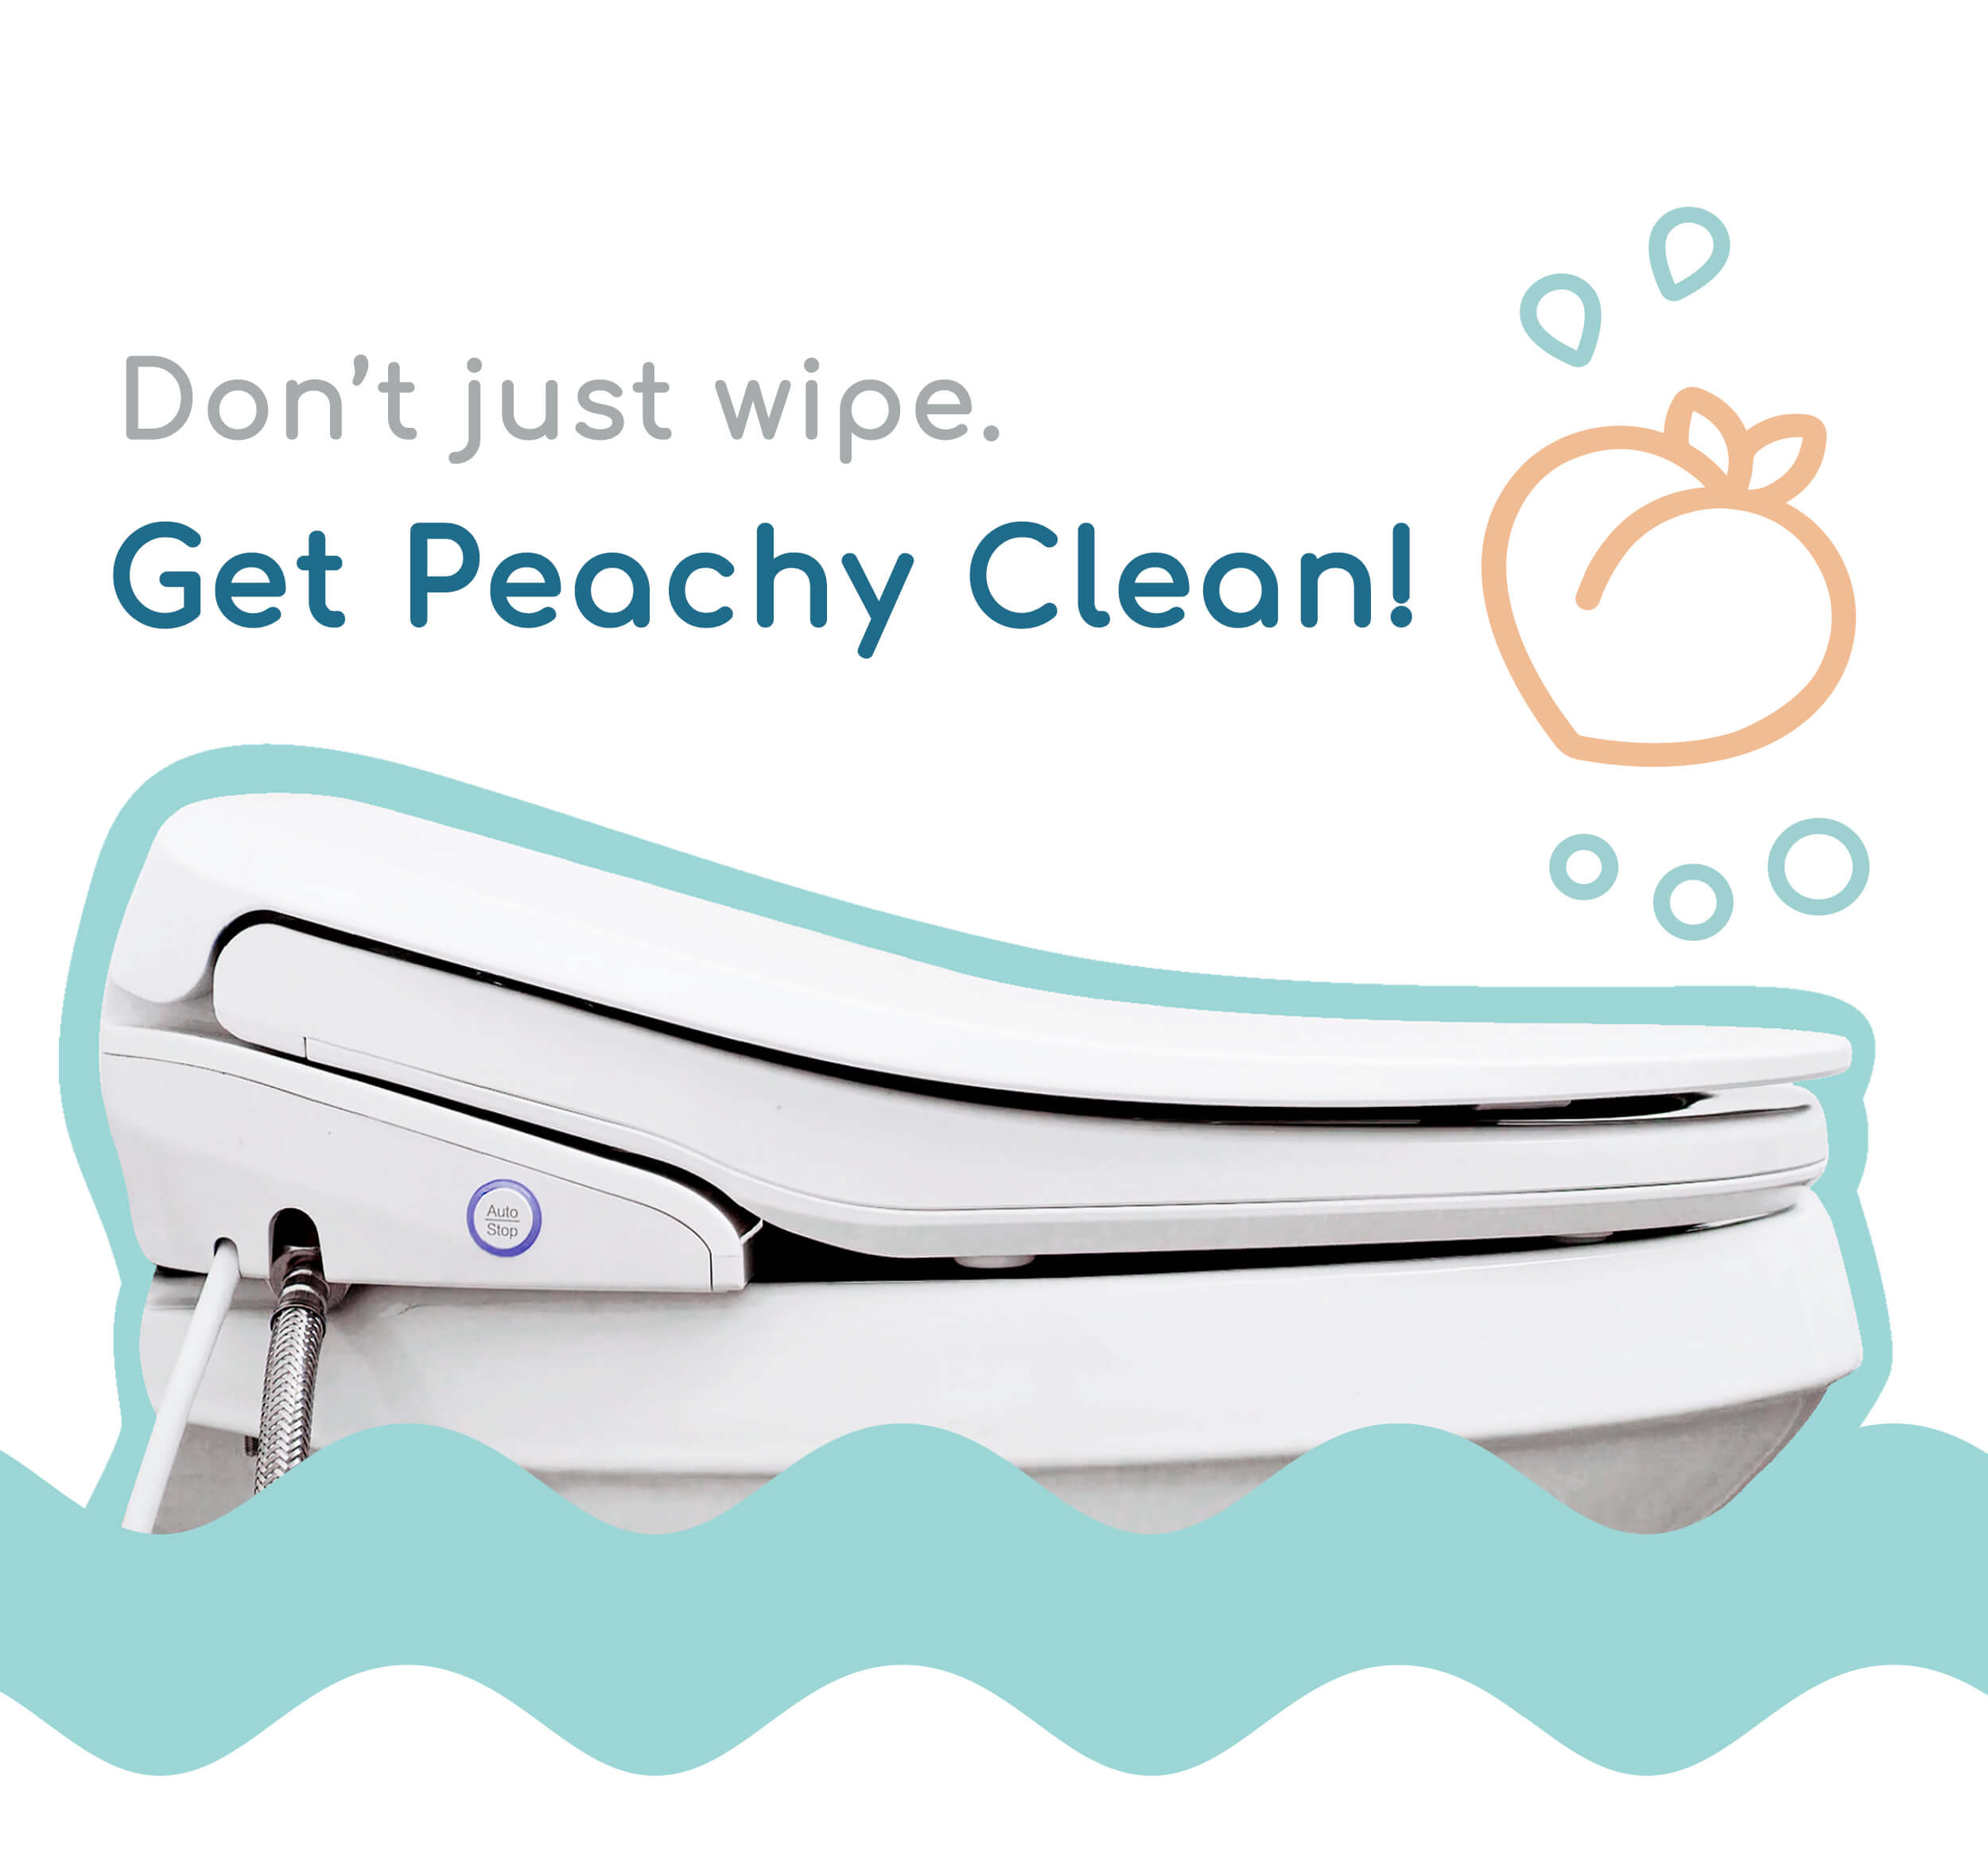 Don't Just Wipe. Get Peachy Clean!